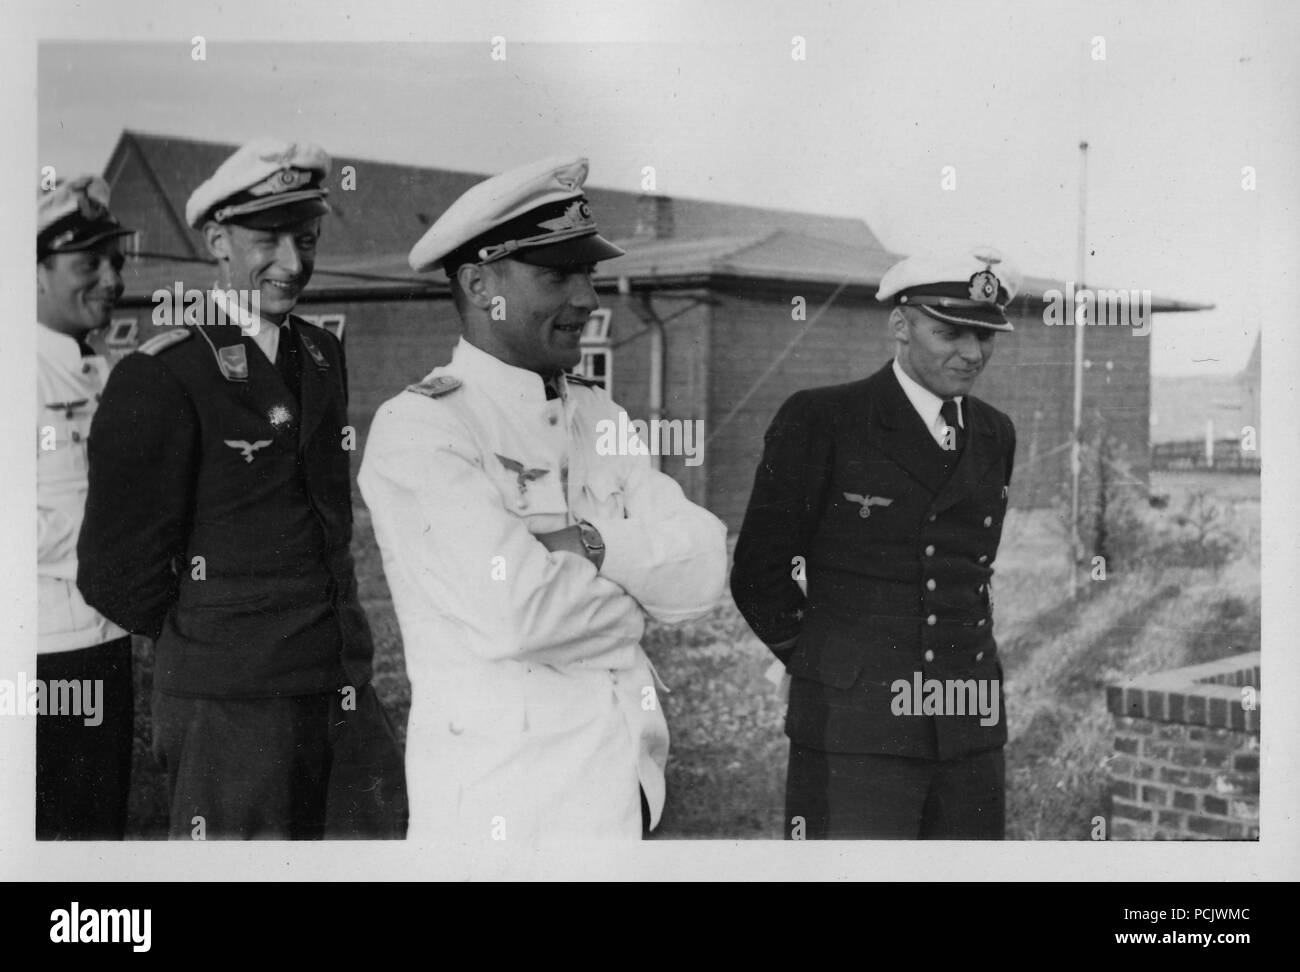 Image from the photo album of Oberleutnant Wilhelm Gaul: Willi Gaul (on right) in Kriegsmarine uniform stands with Luftwaffe officers in summer uniform. Will Gaul served with 1. Staffel, Küstenfliegergruppe 106 as a naval aircrew observer in 1939-1940 until he transferred to the Luftwaffe. Stock Photo